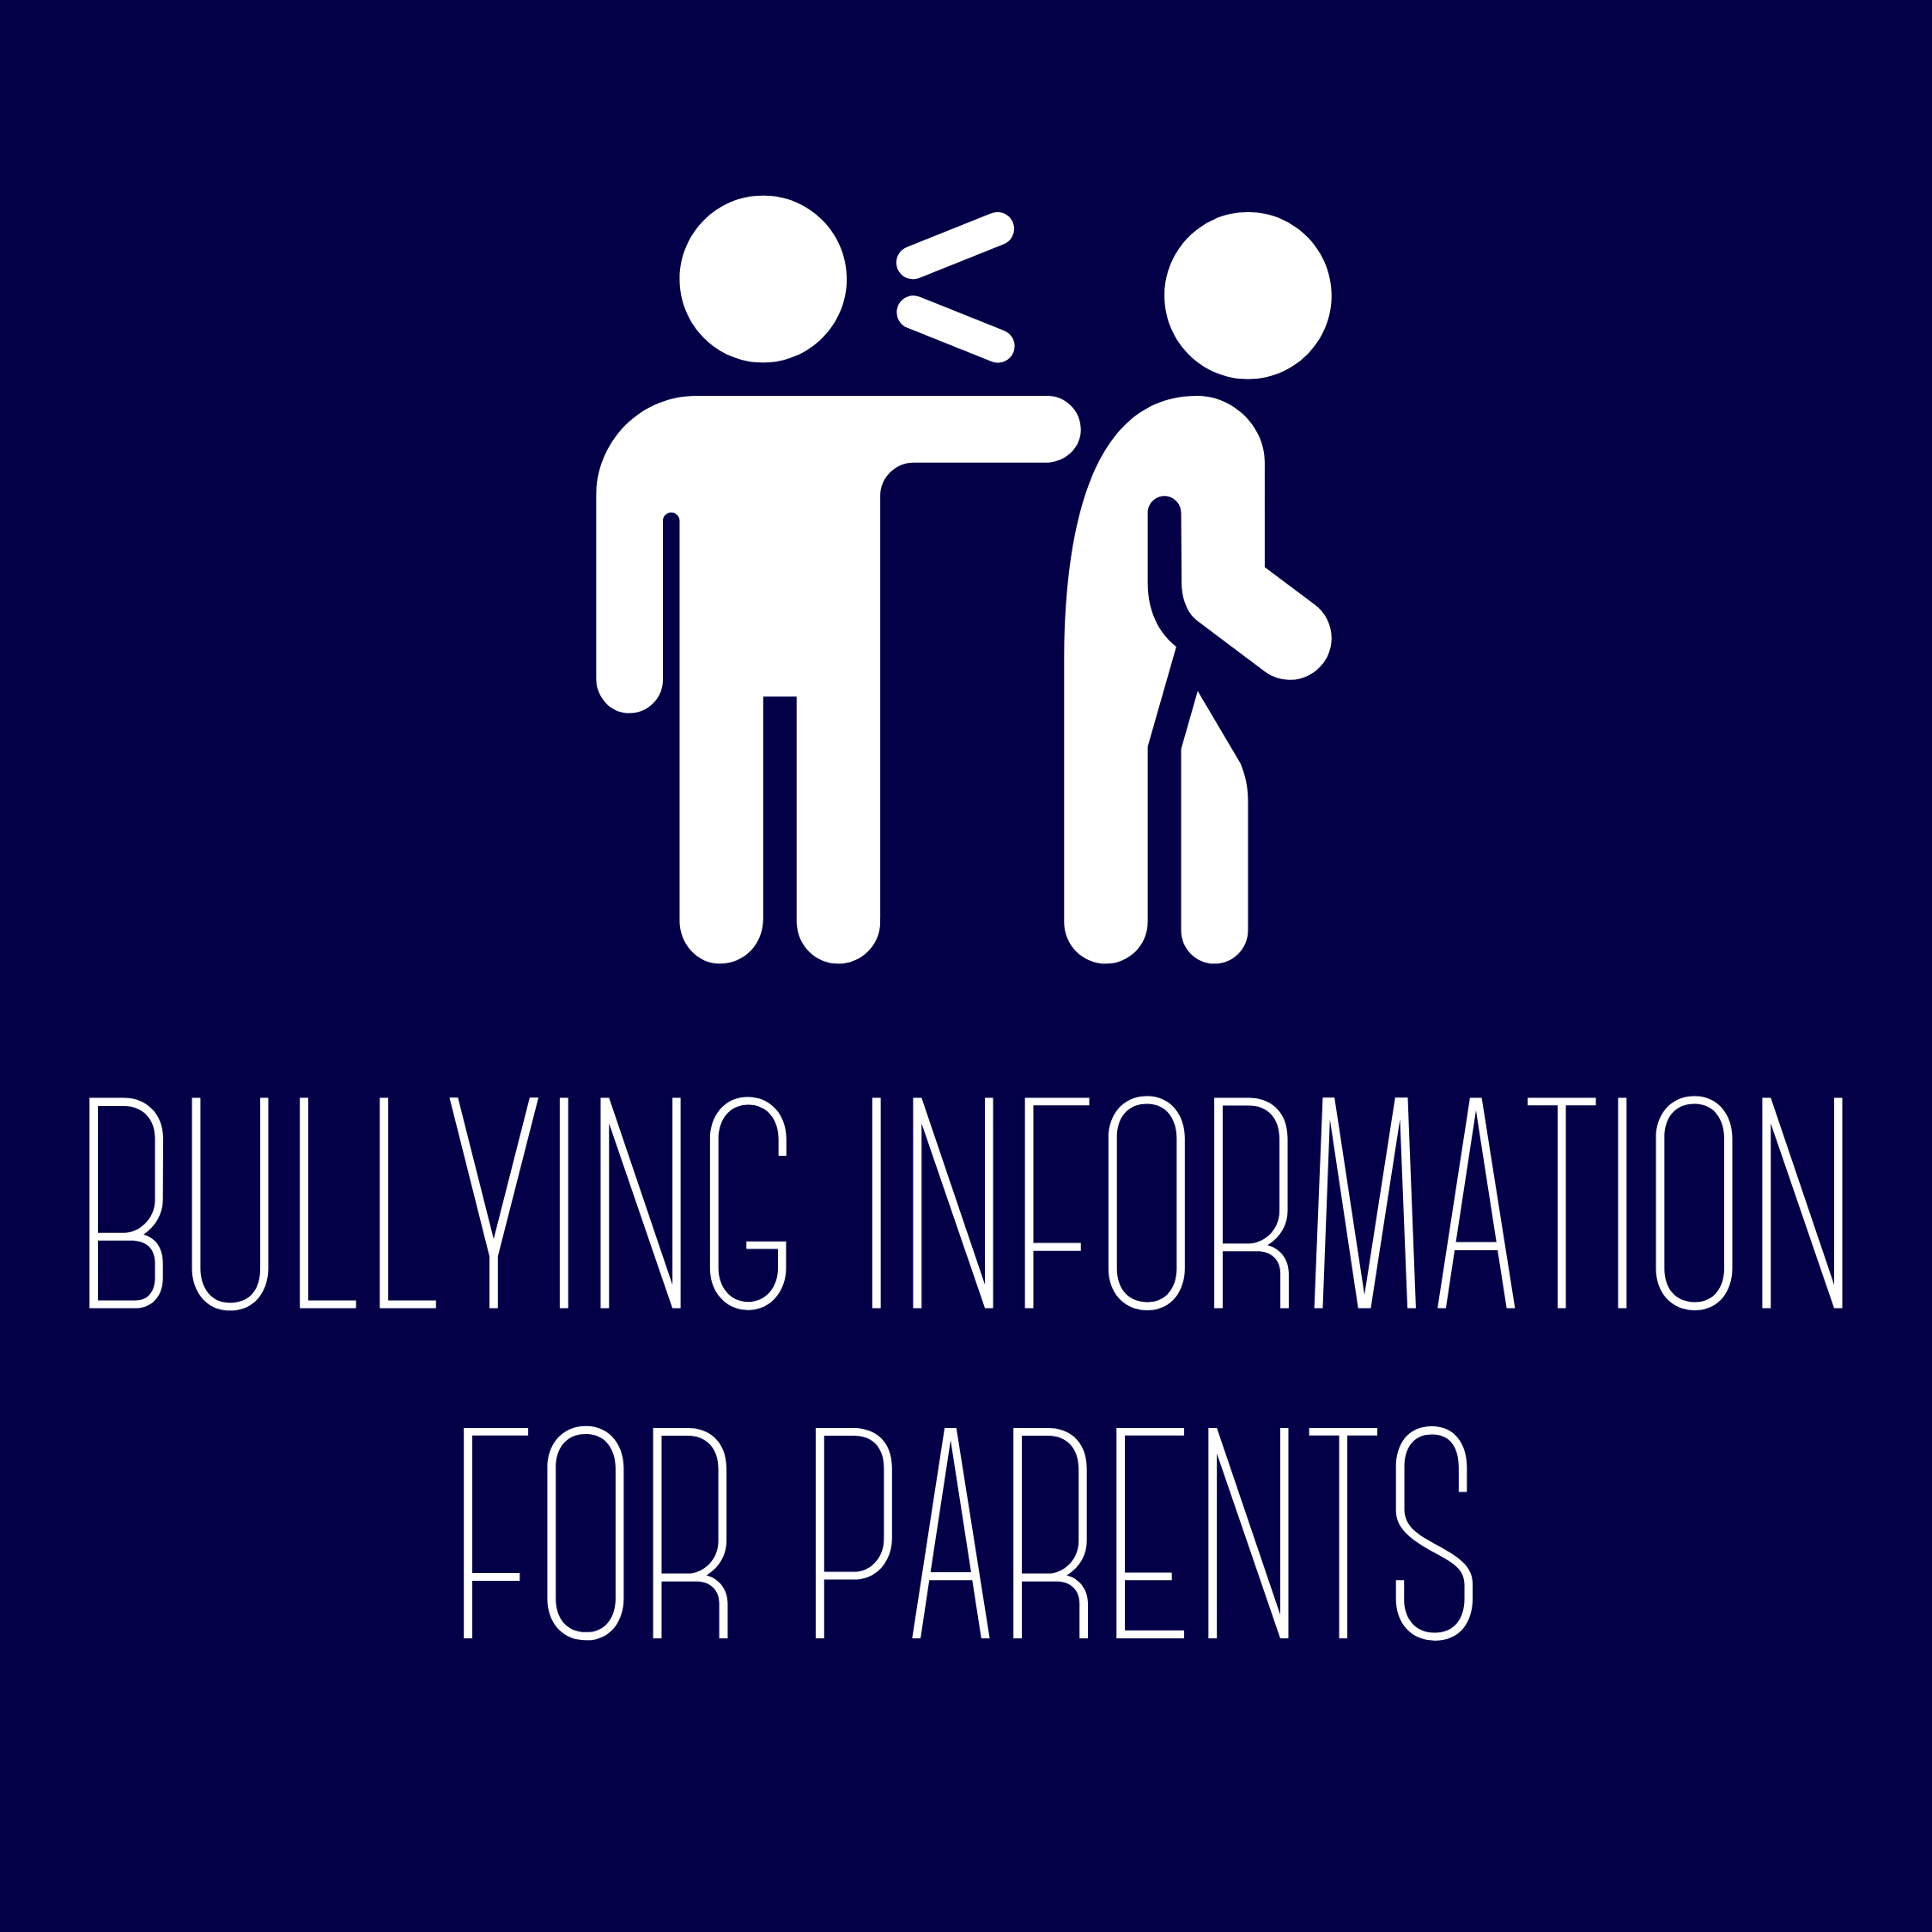 Bullying Information for Parents